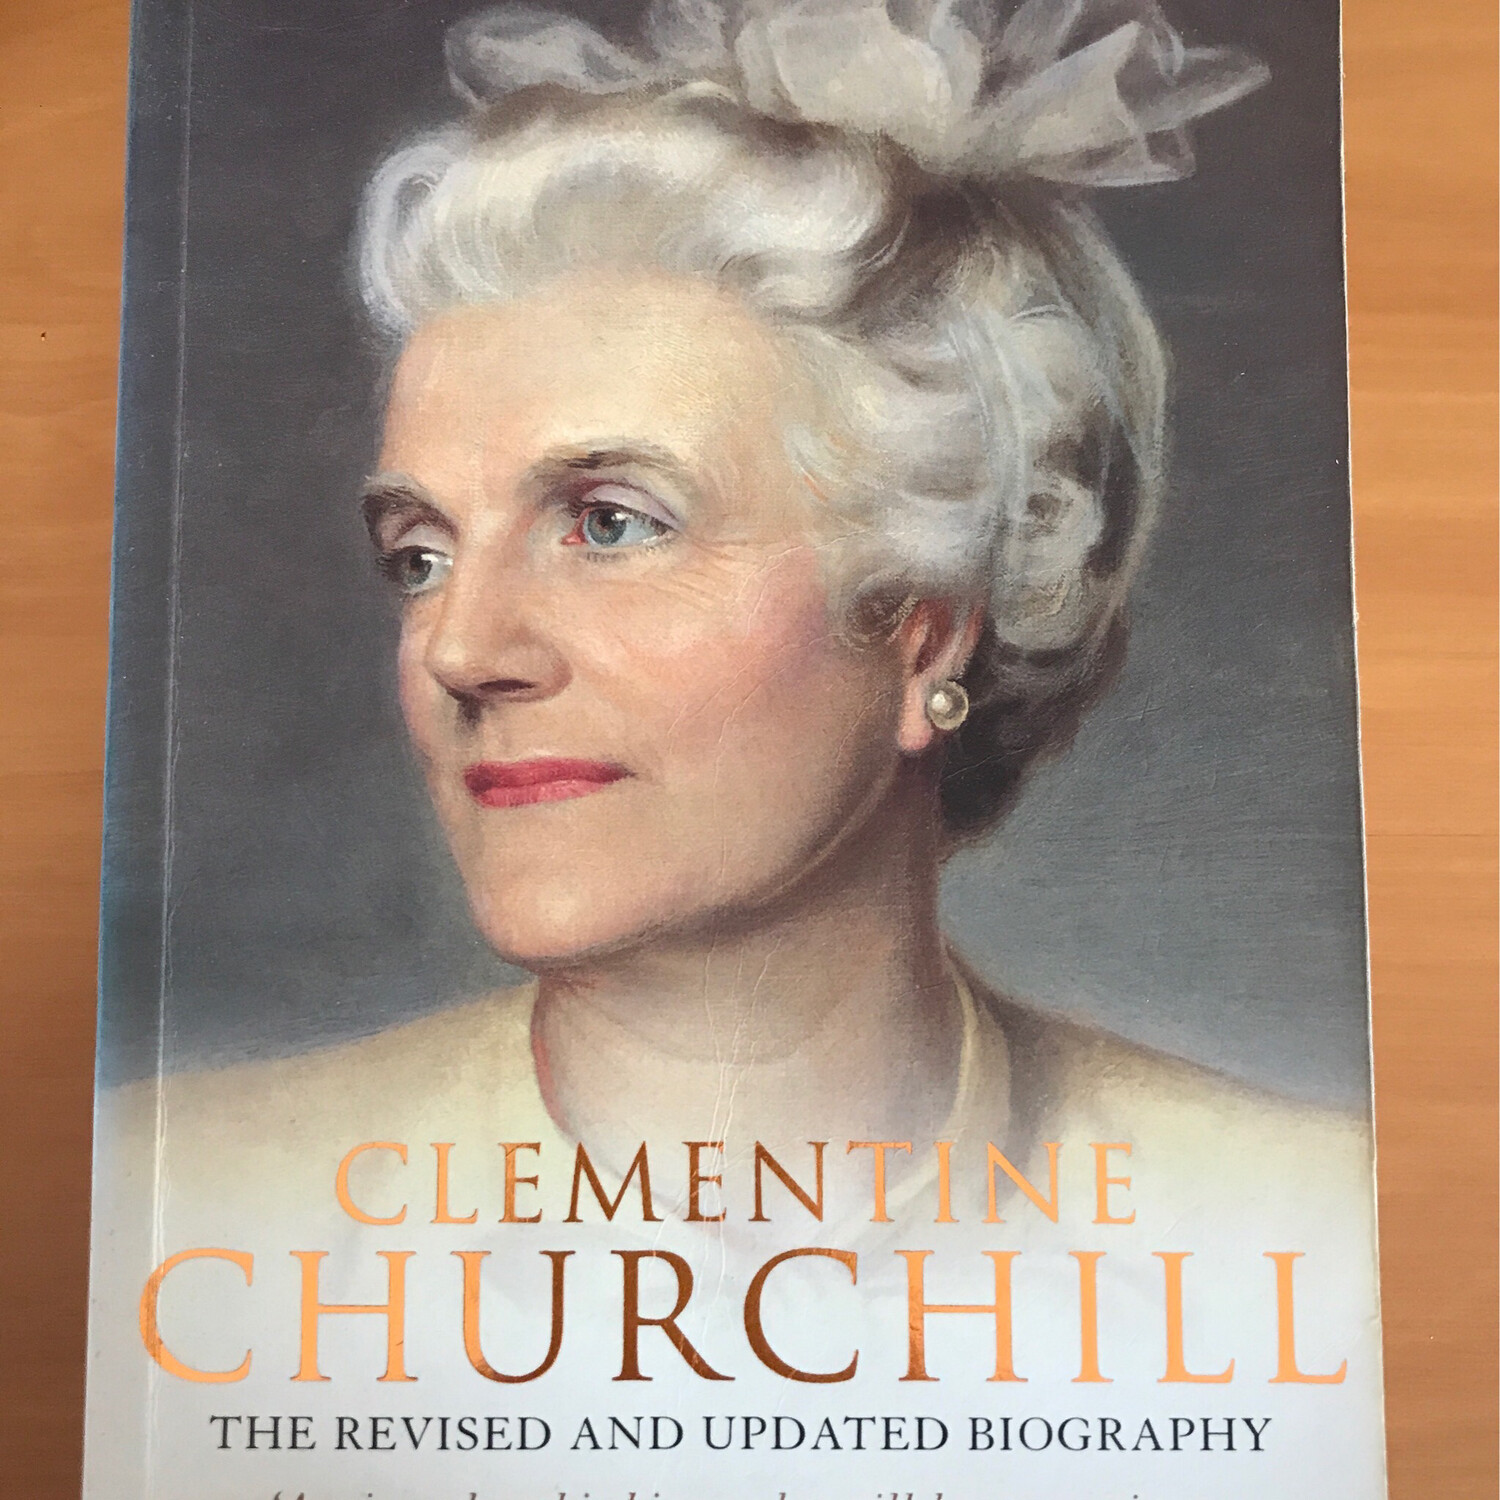 Clementine Churchill, Mary Soames